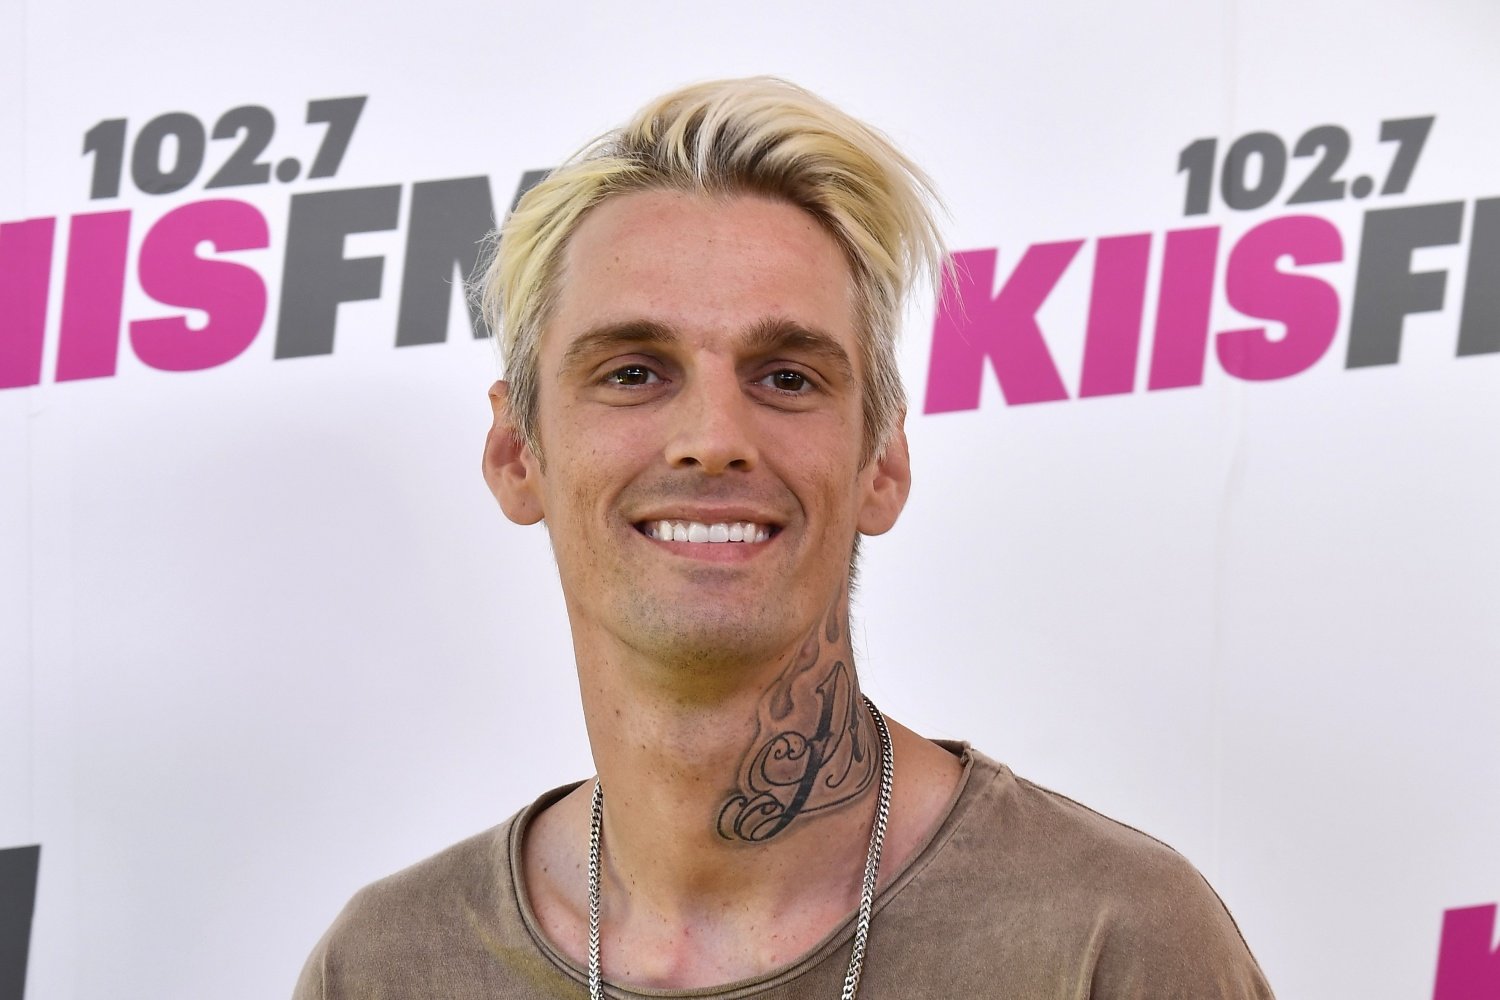 Unveiling of Aaron Carter's Gravestone Prior to First Death Anniversary